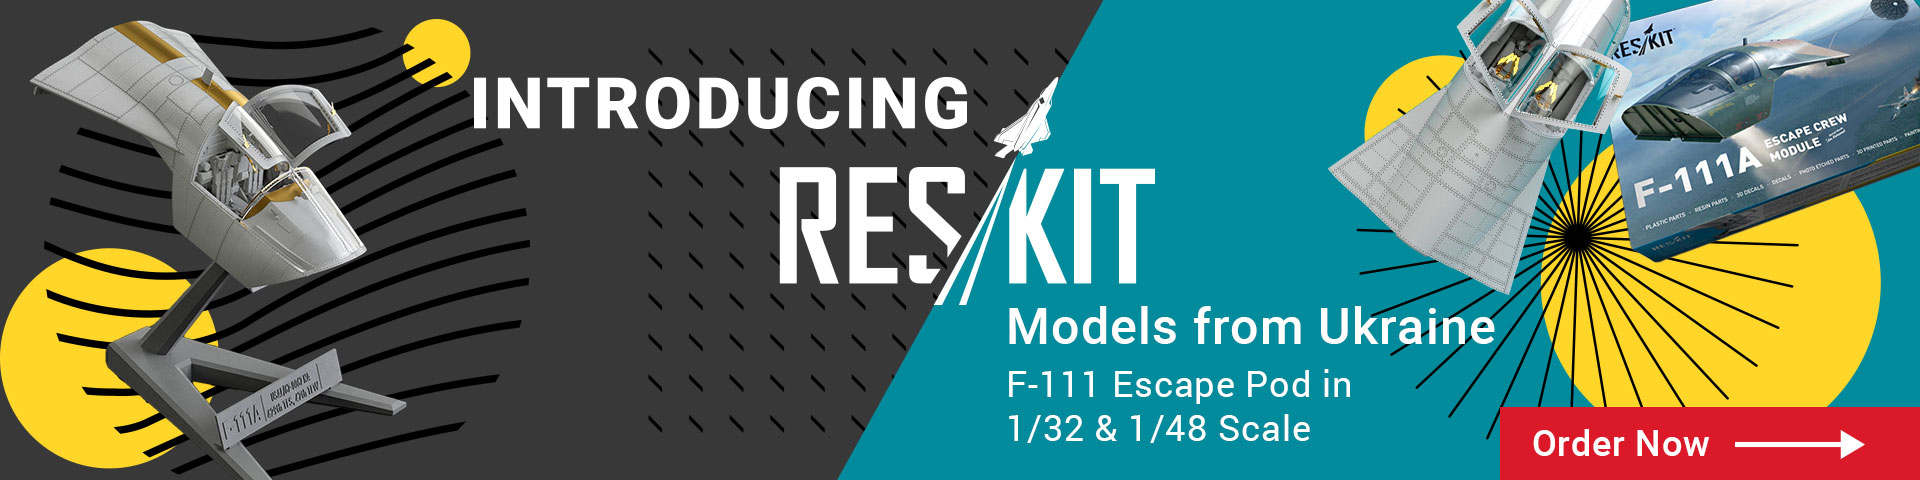 Introducing Res Kit models from Ukraine. Order now